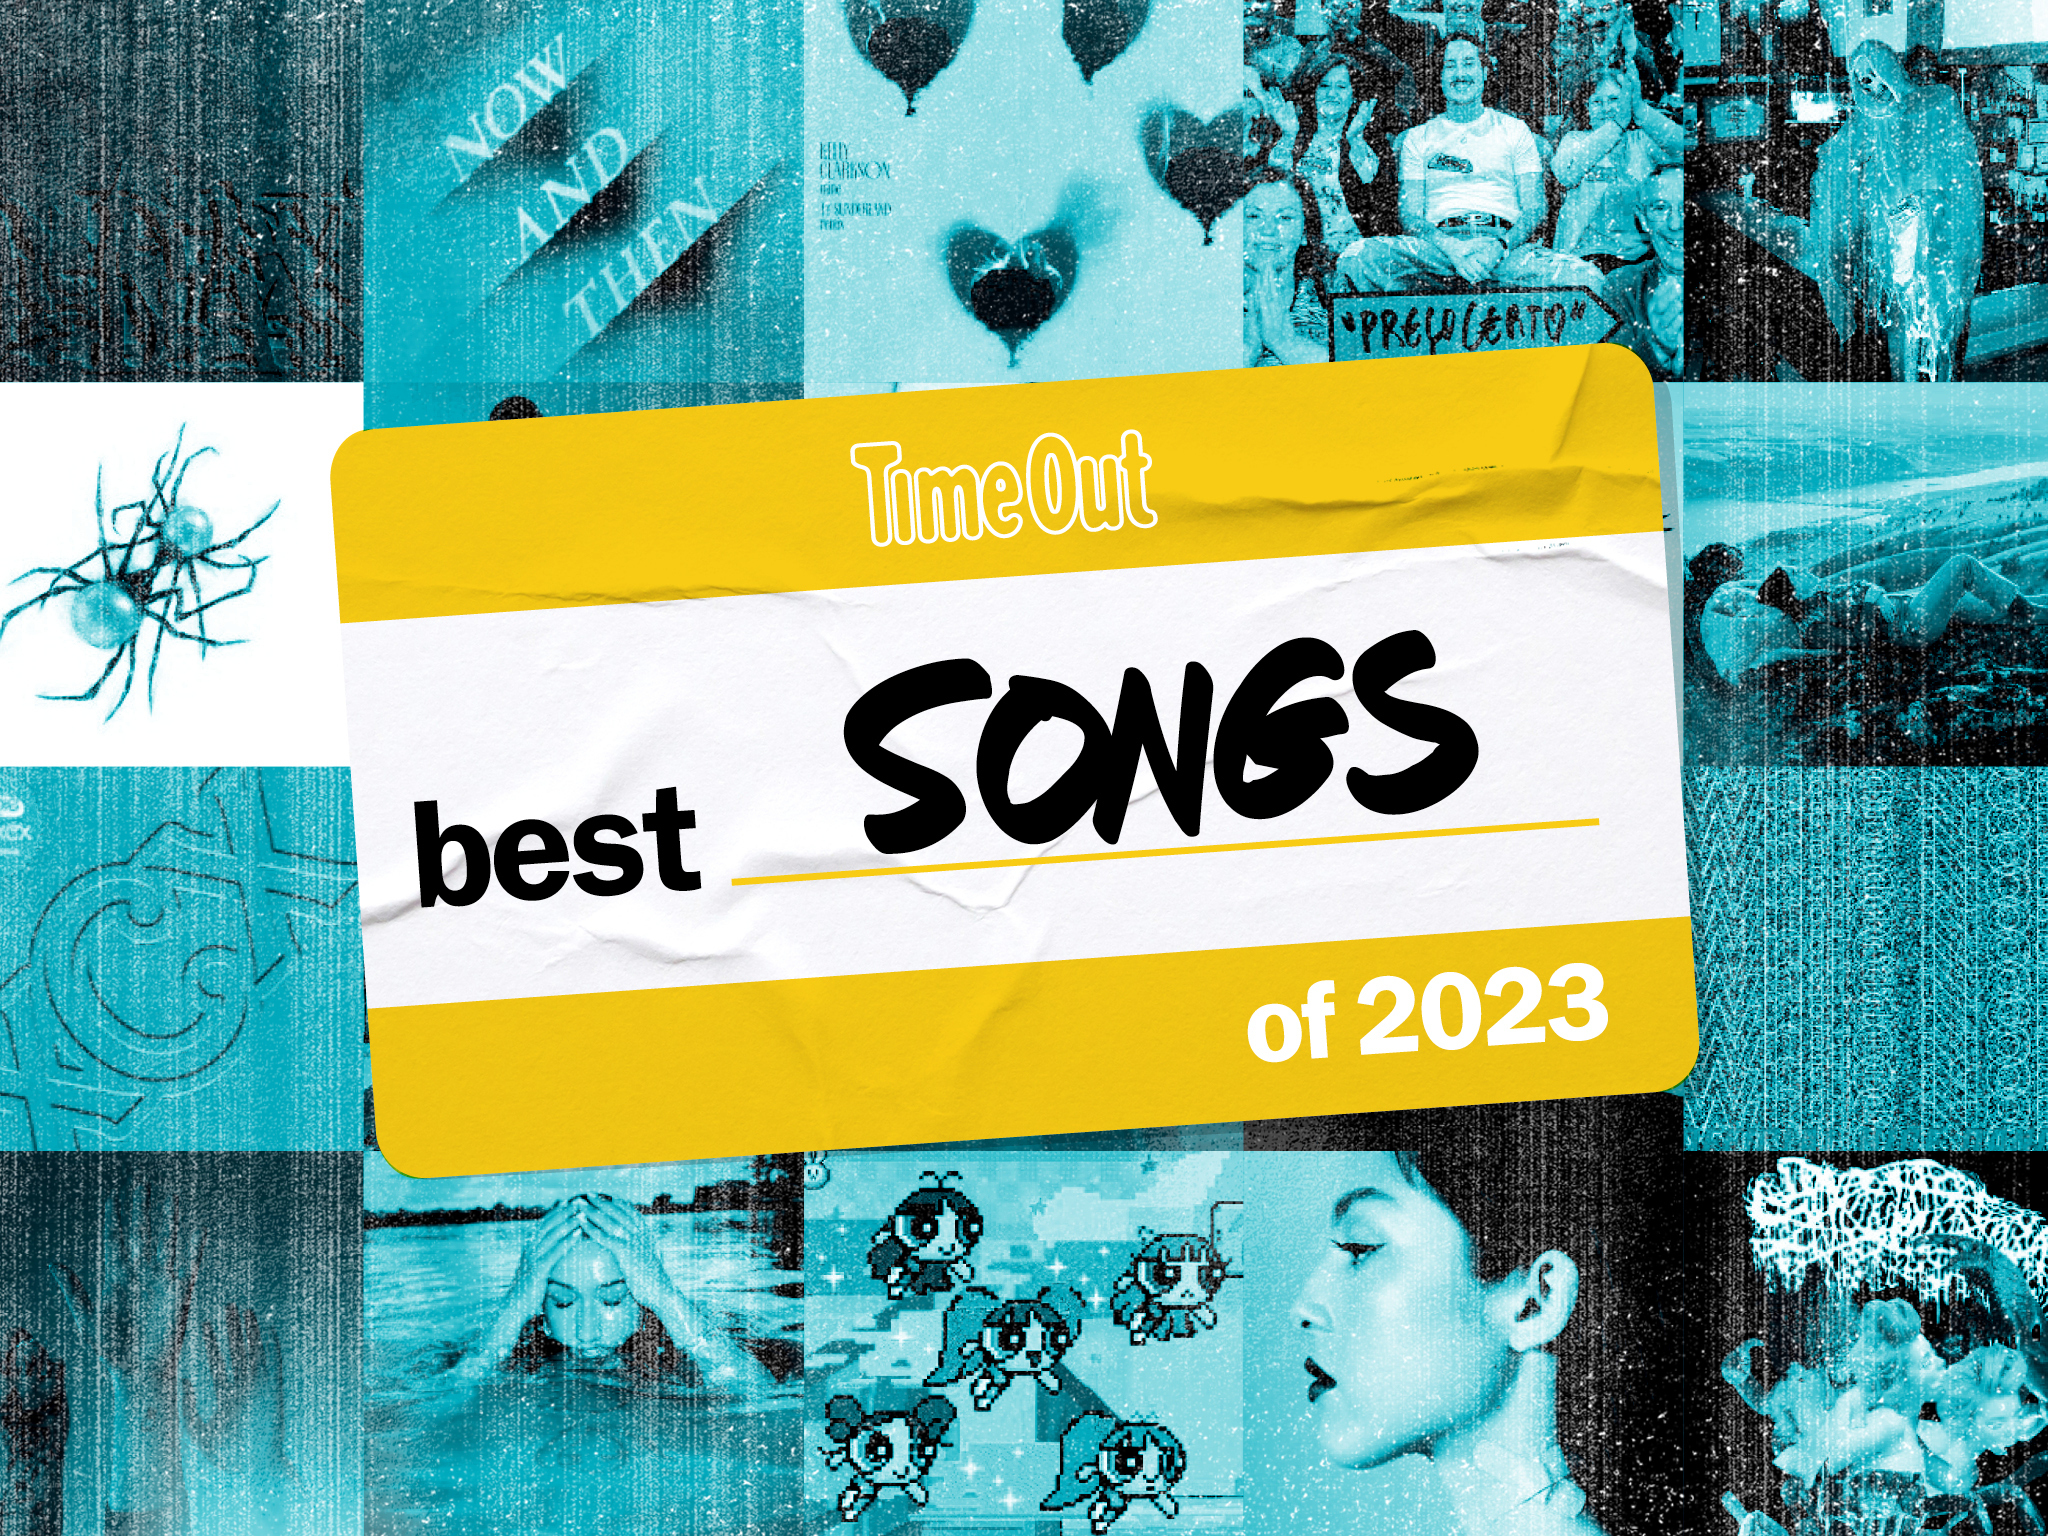 Time Out's Best 23 Songs of 2023